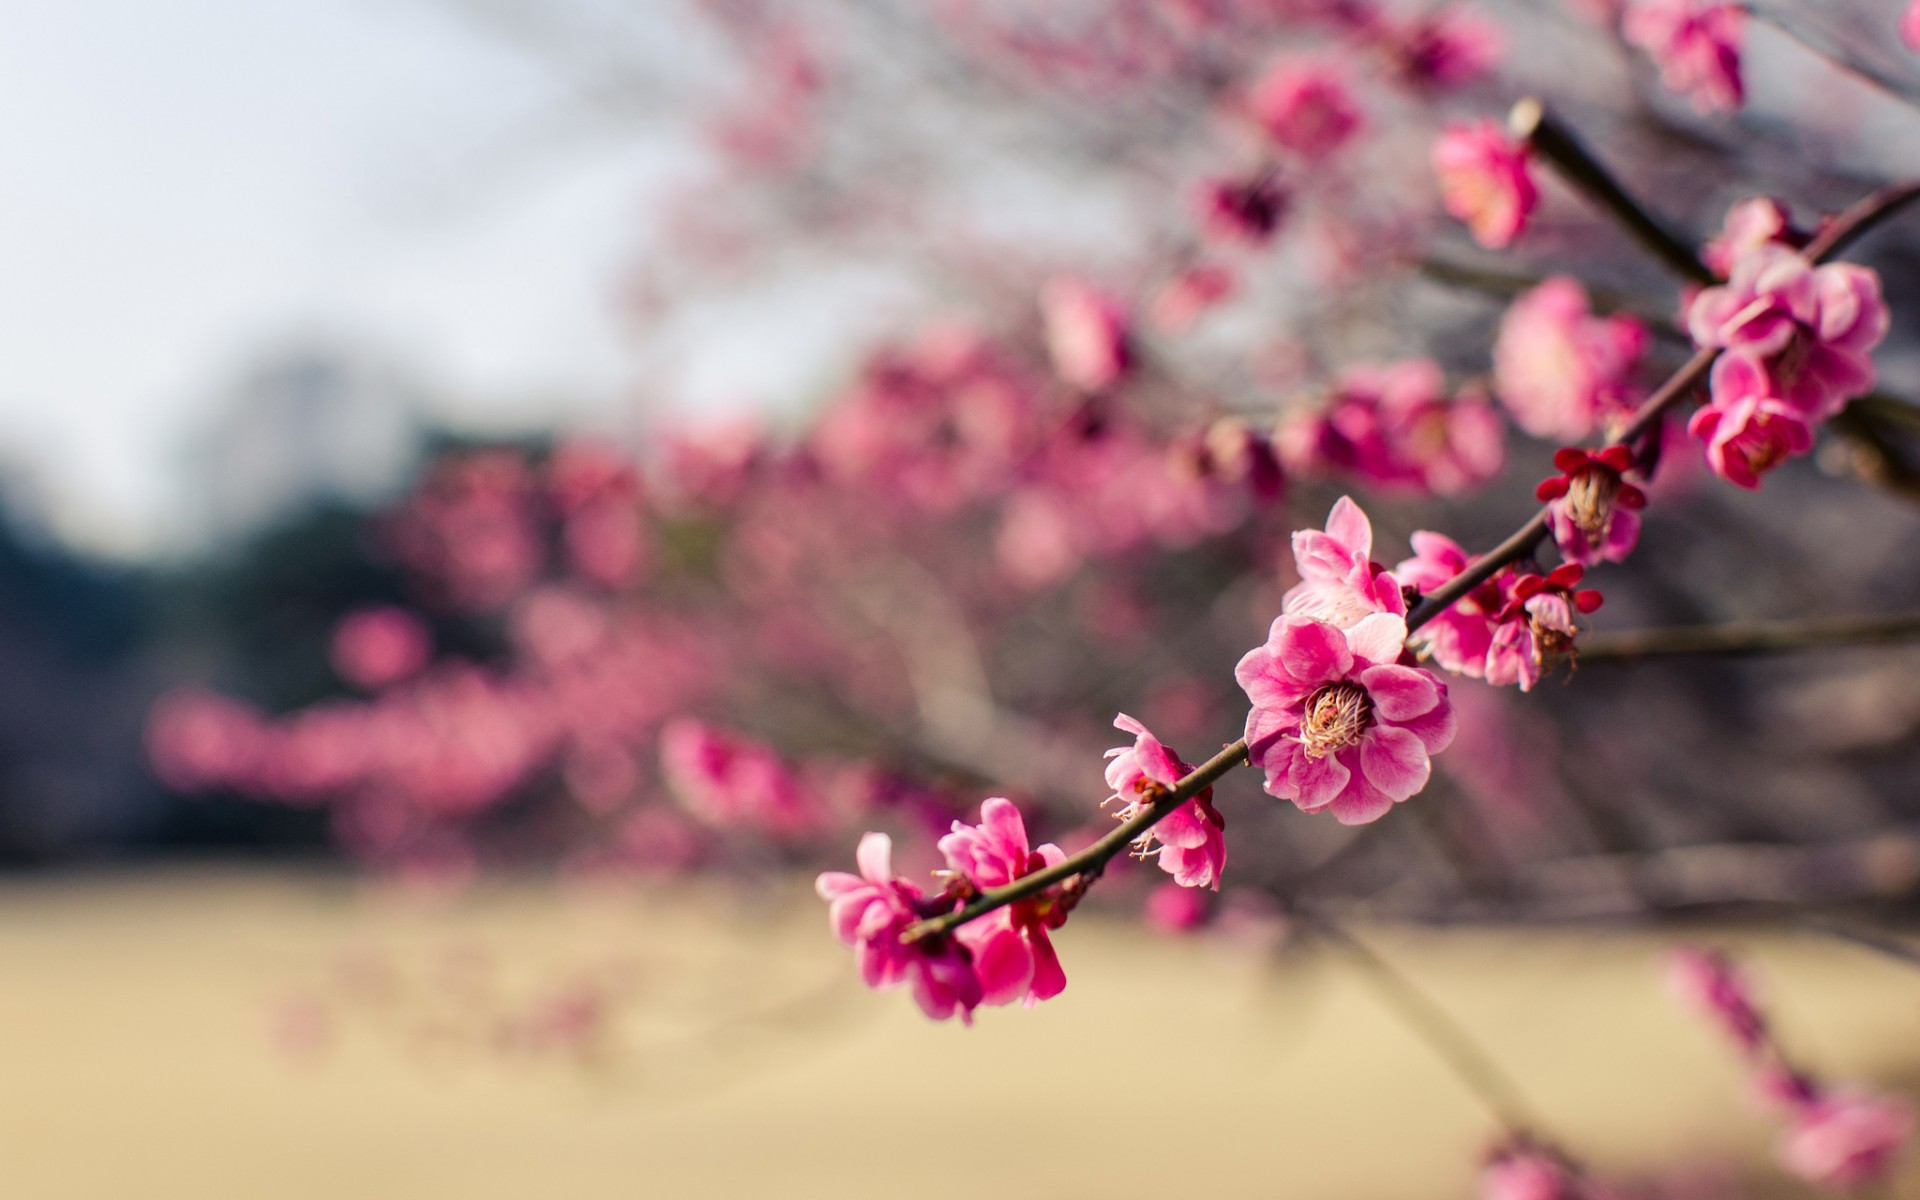 japan, Park, Plum, Tree, Branches, Flowers, Pink, Petals, Close up, Blurred Wallpaper